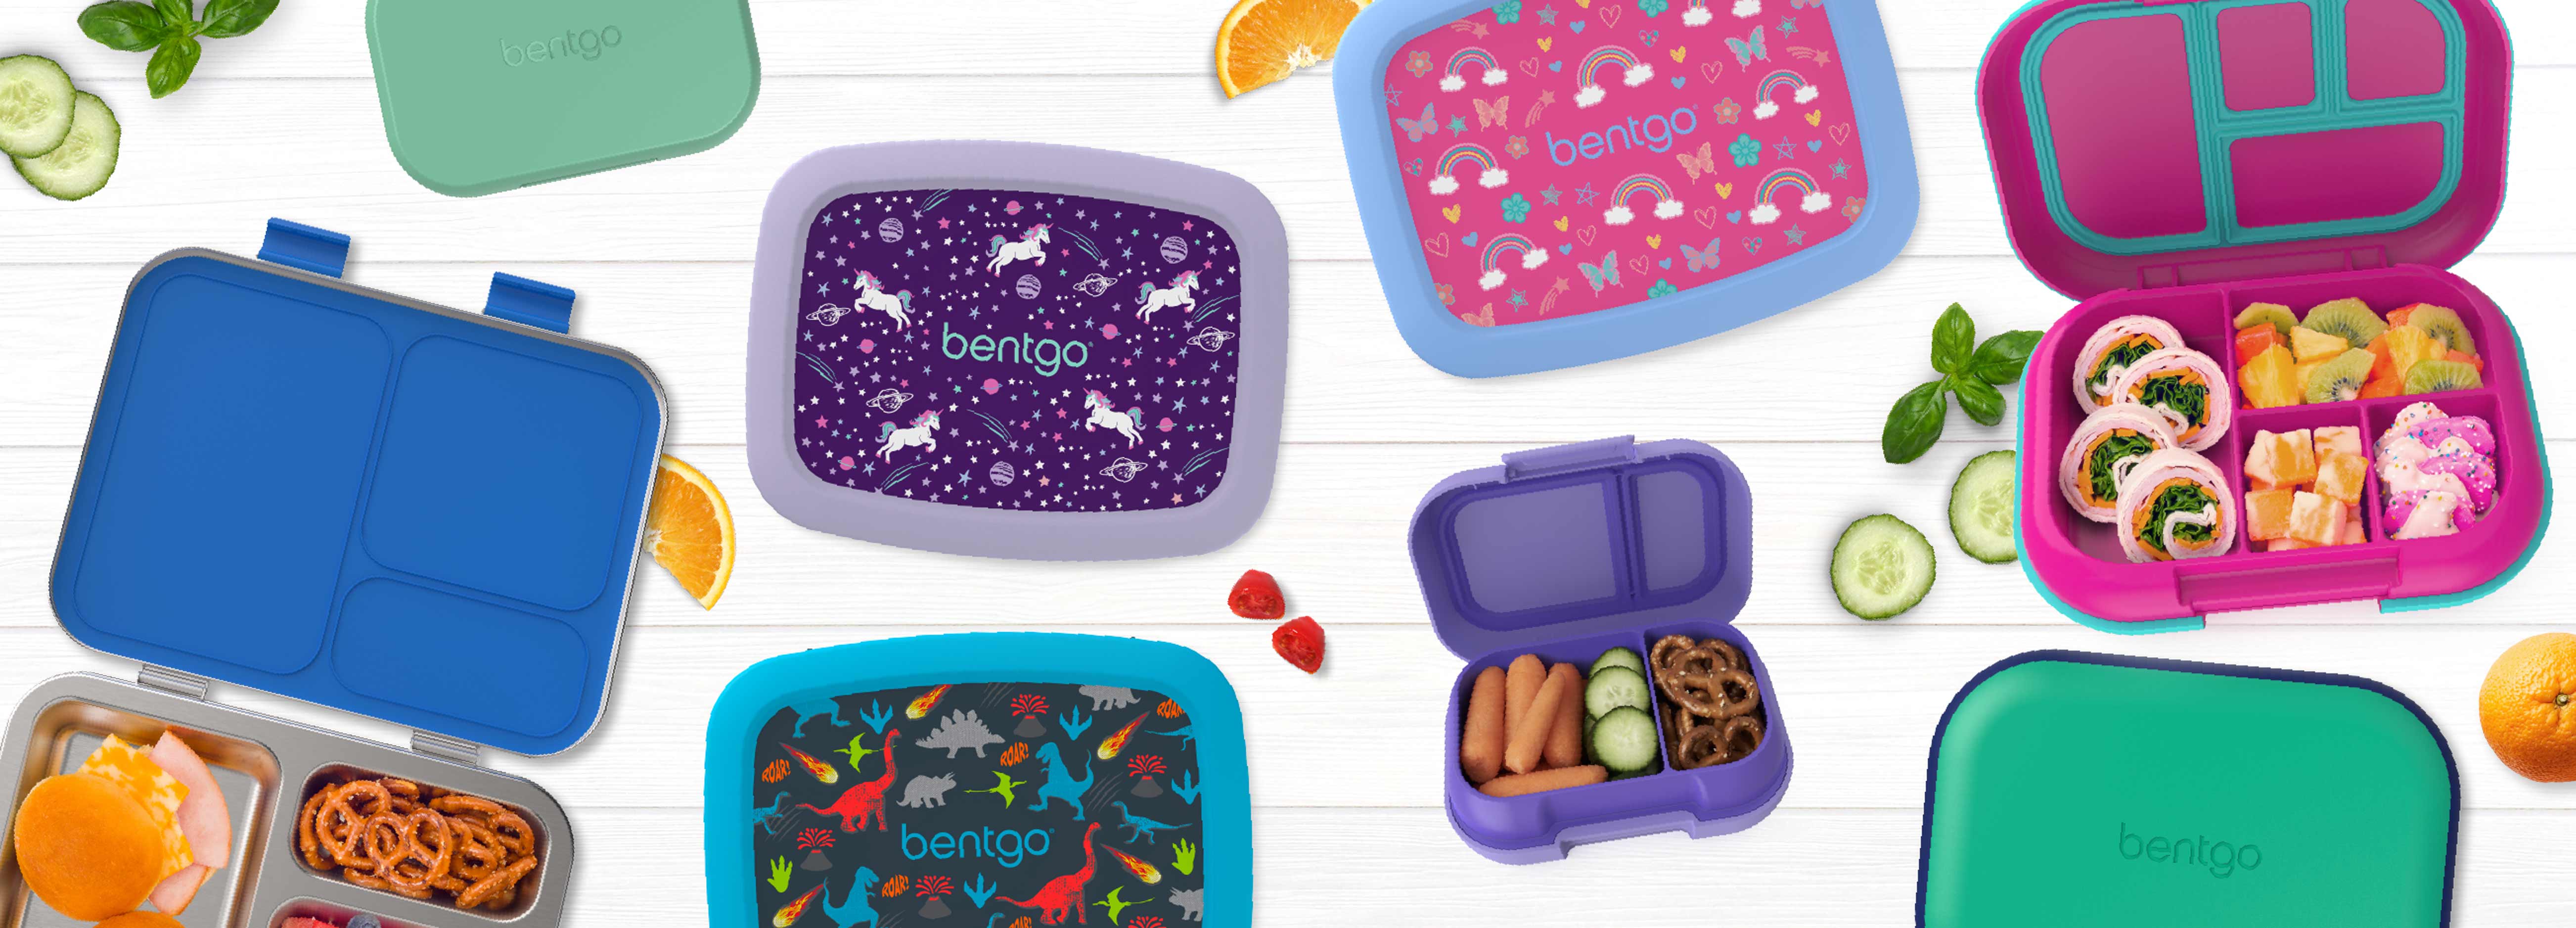 Bento-style Meal Containers For Kids | Bentgo® Official Site